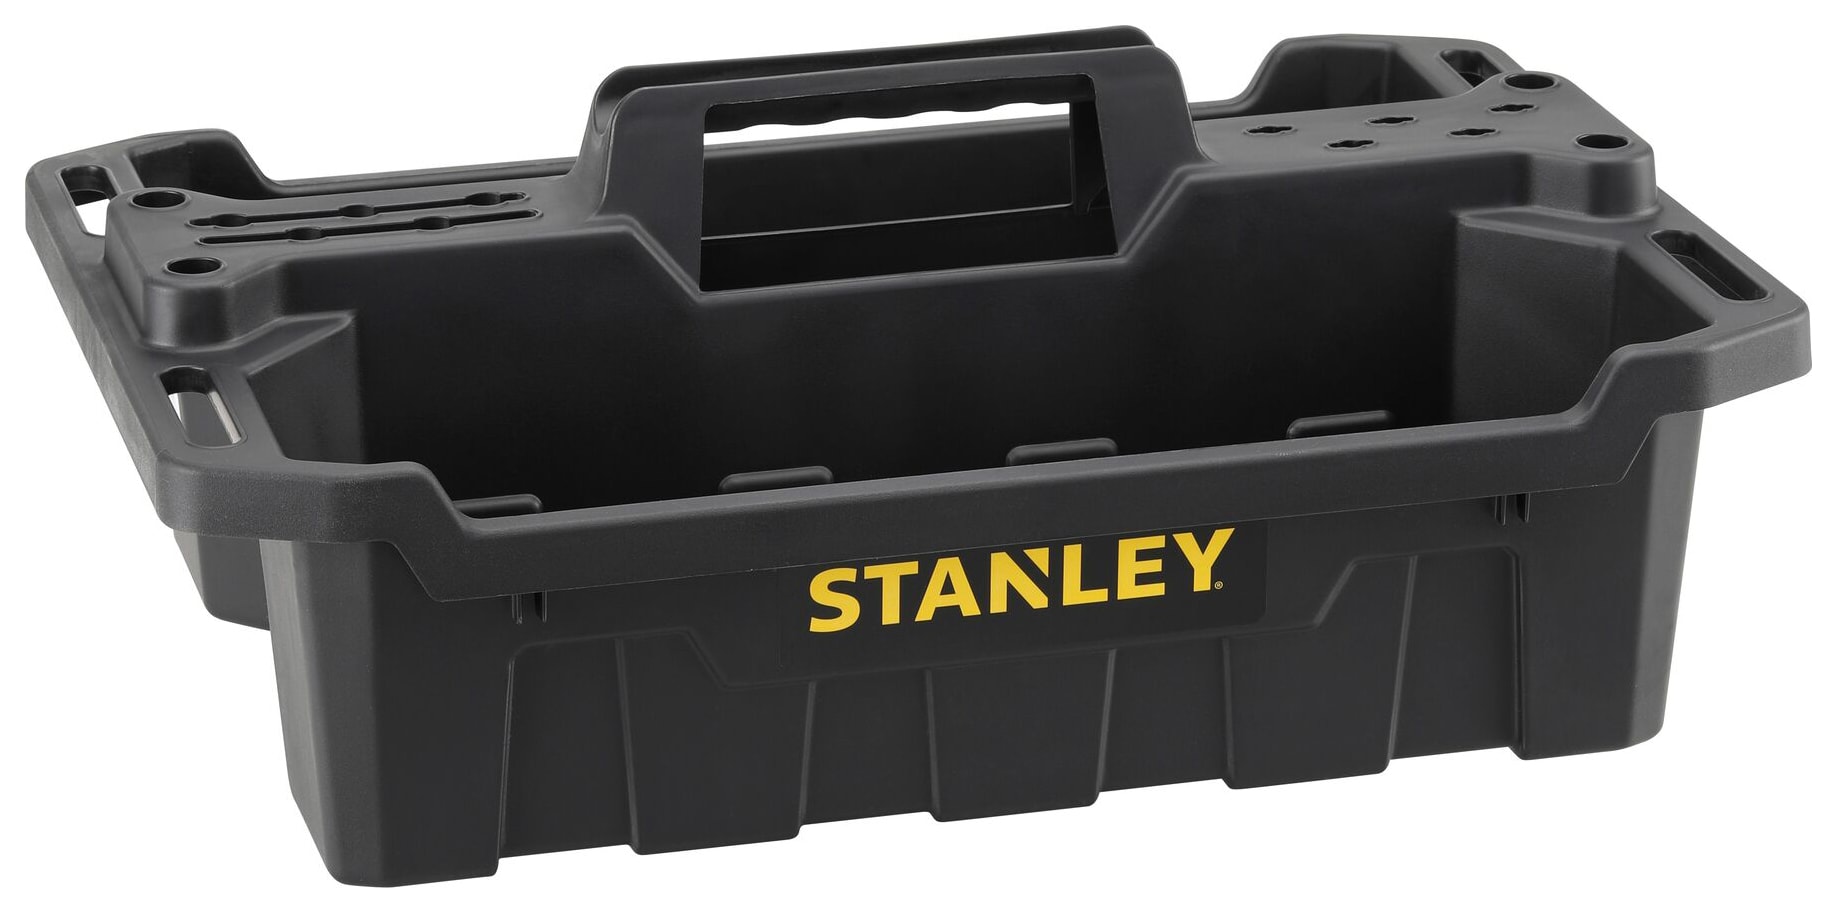 Stanley STST1-72359 Open Tote Tray